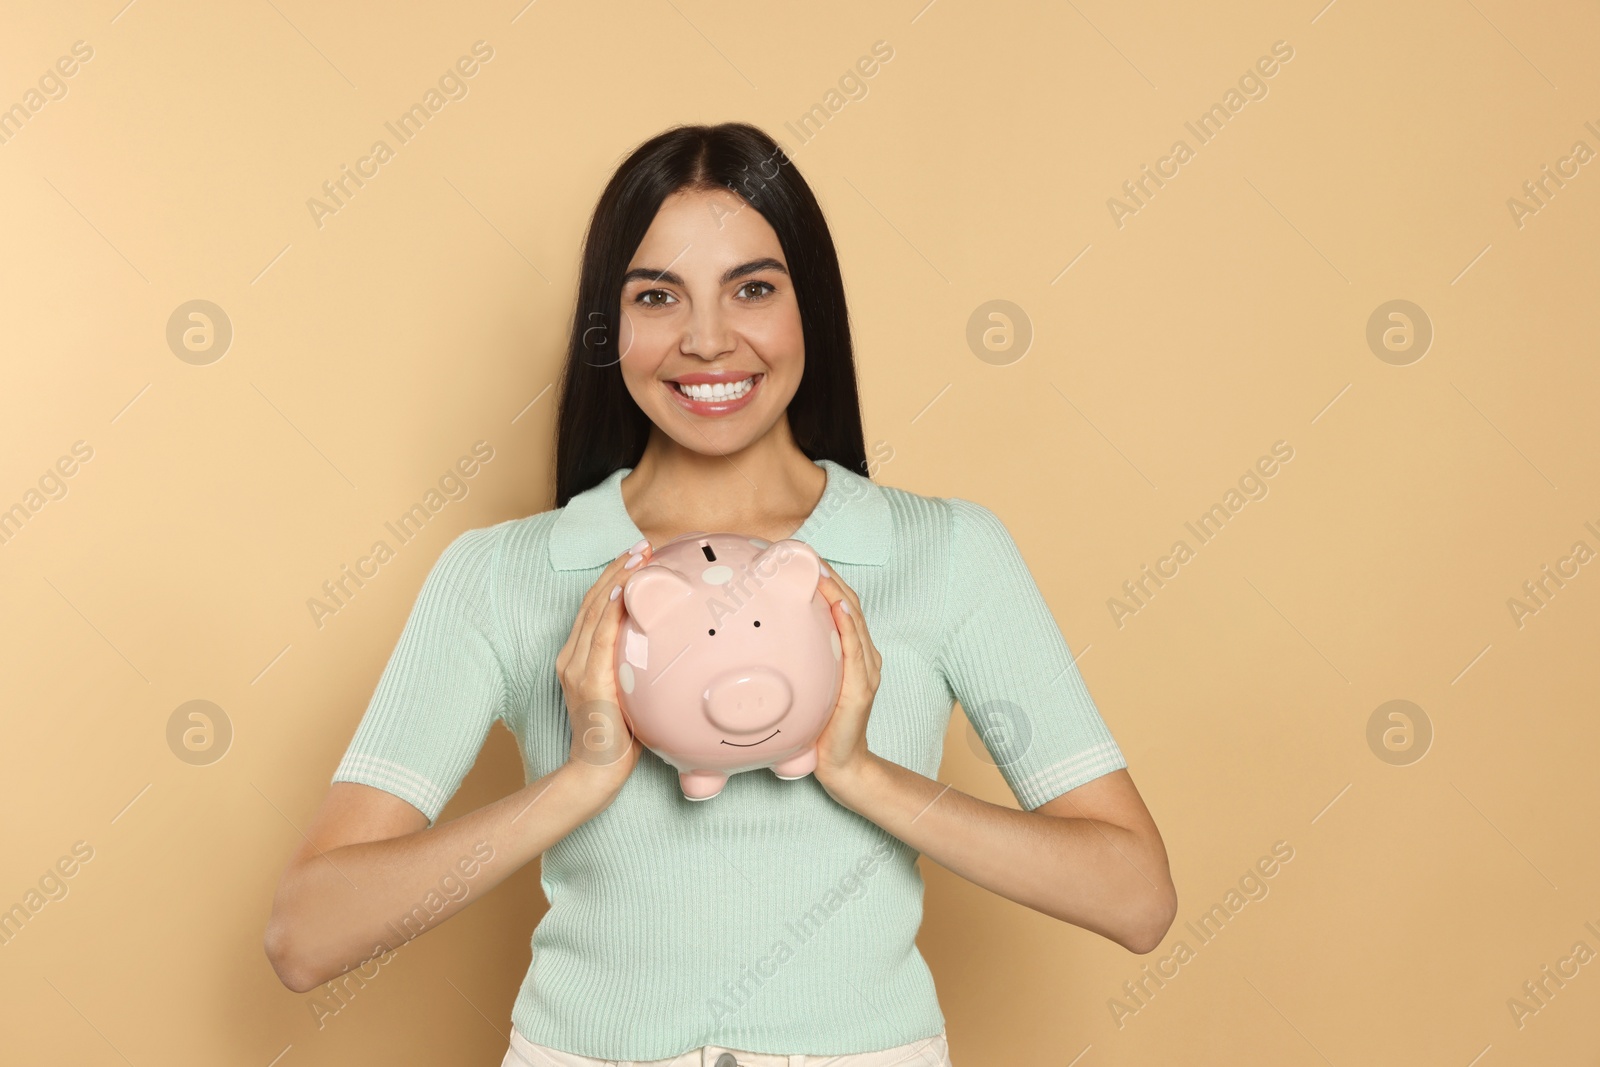 Photo of Happy young woman with ceramic piggy bank on beige background